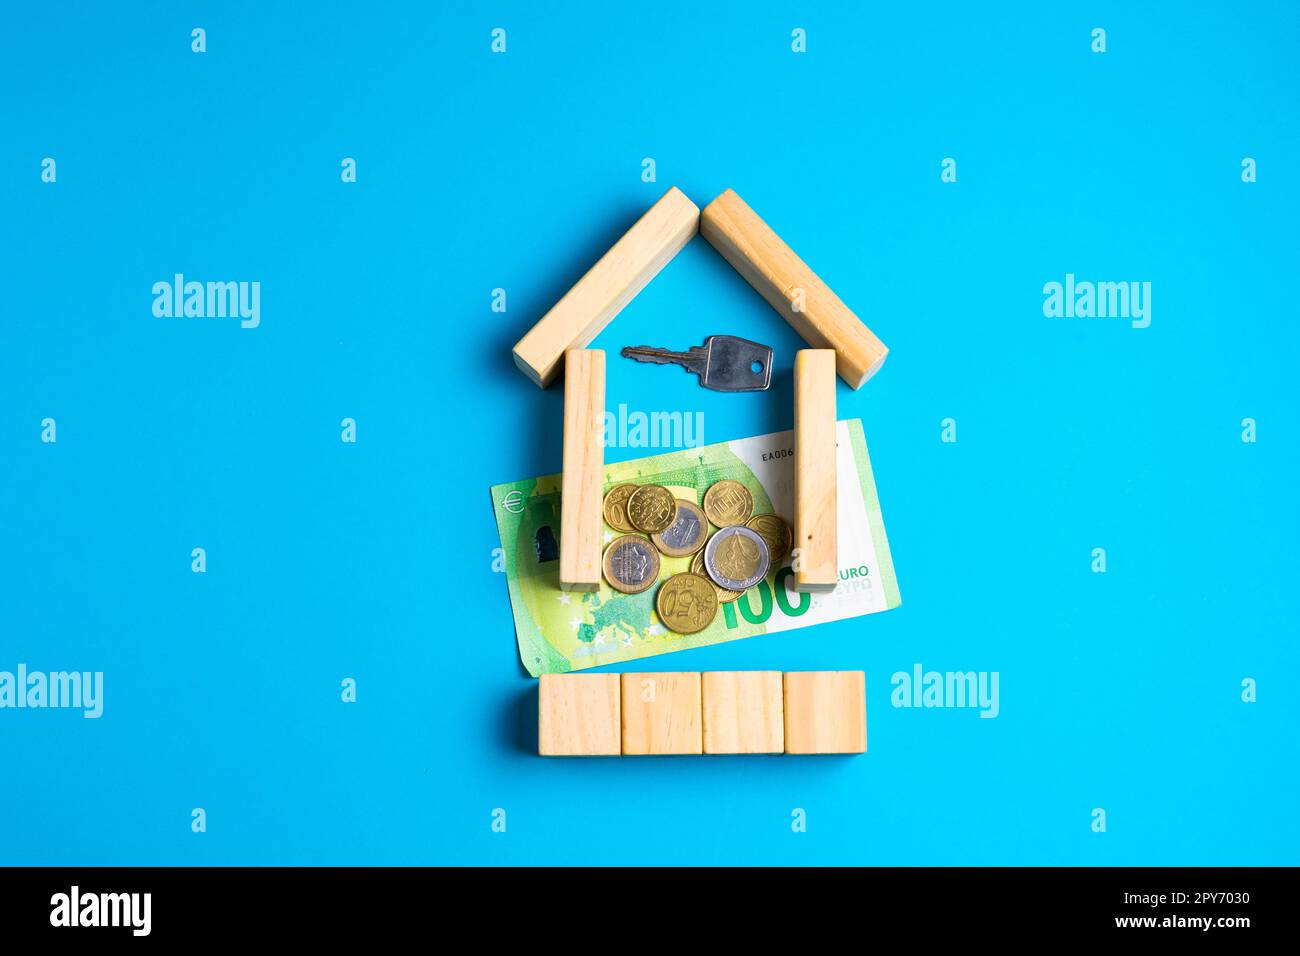 Wooden toy house with keys on blue. Empty space to put text or something else. Stock Photo